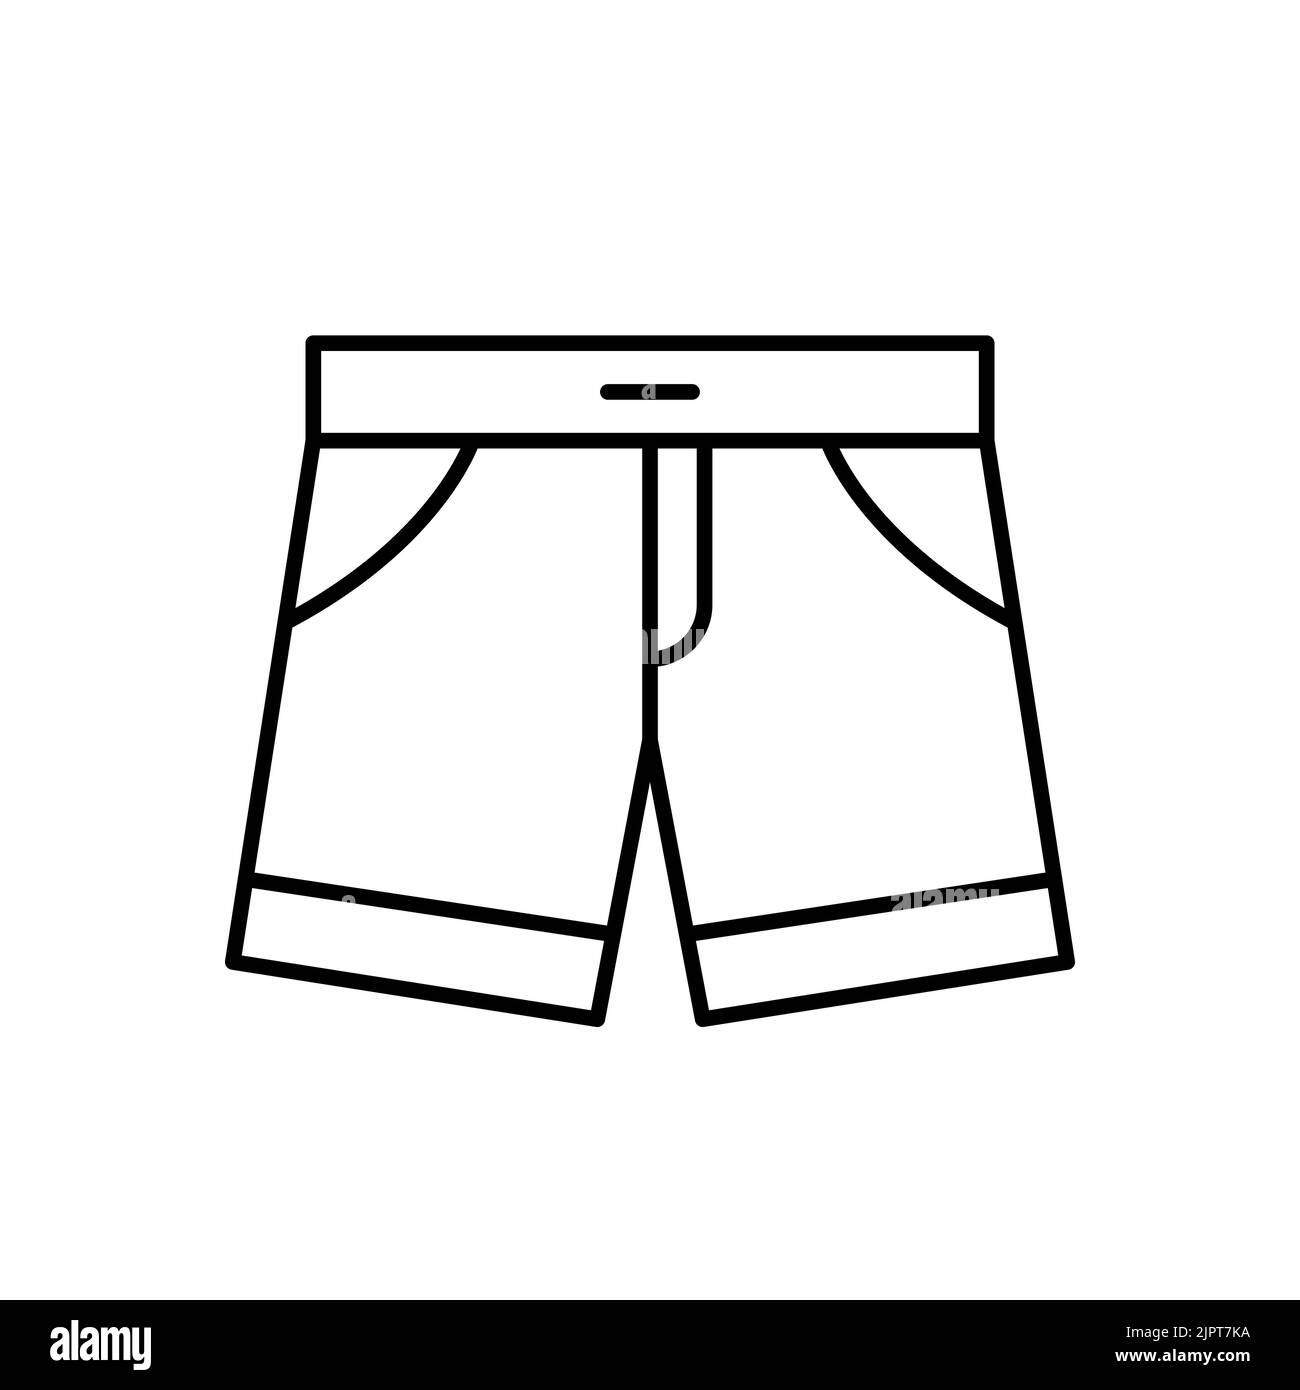 Blank Mens Shorts Template Vector Images (over 12,000)